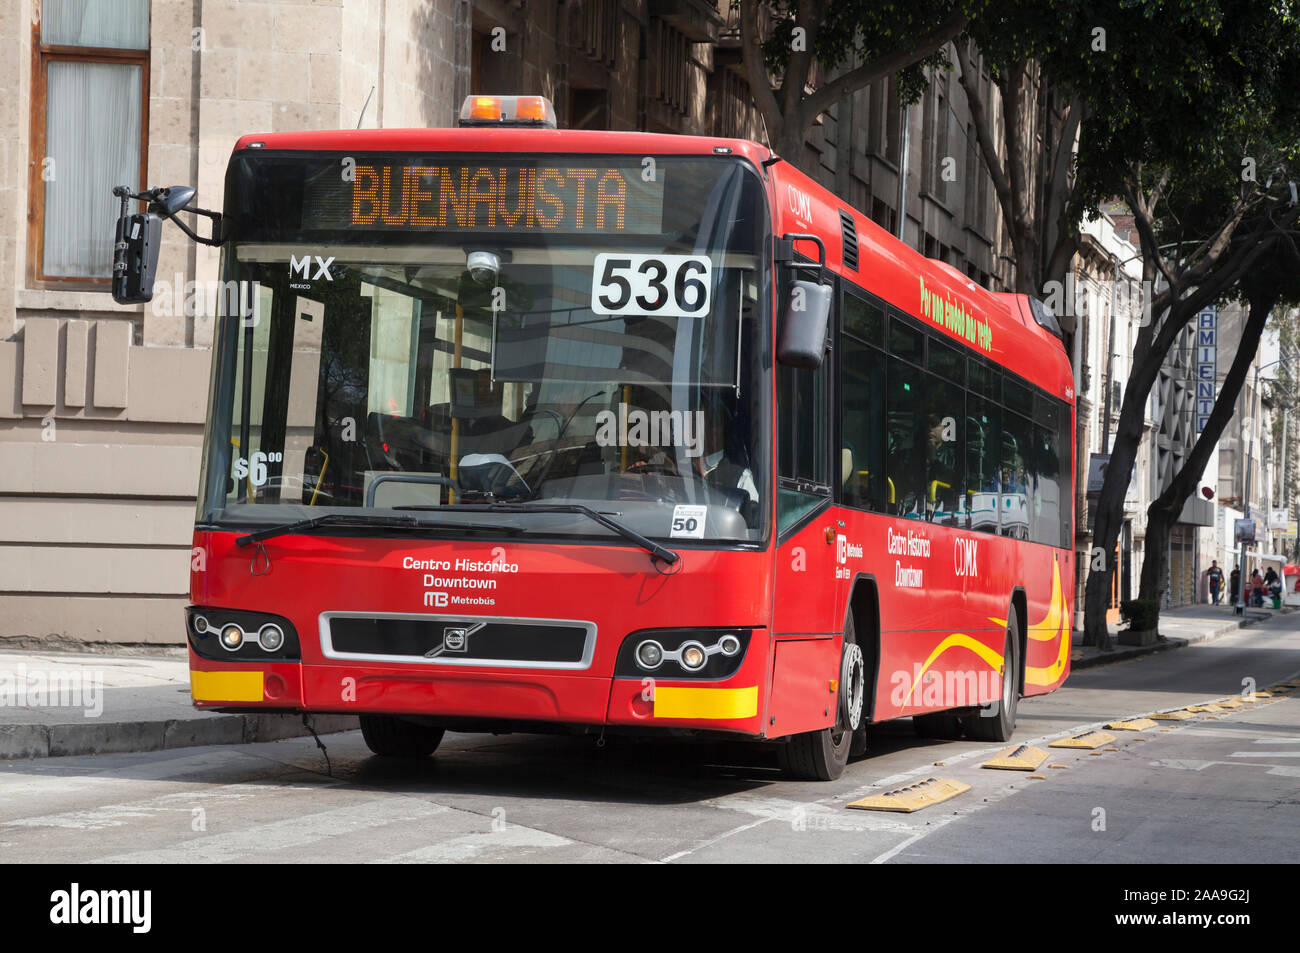 Metrobús in city streets of Mexico City. Metrobús a rapid transit bus system that has served Mexico City since June 2006. Stock Photo